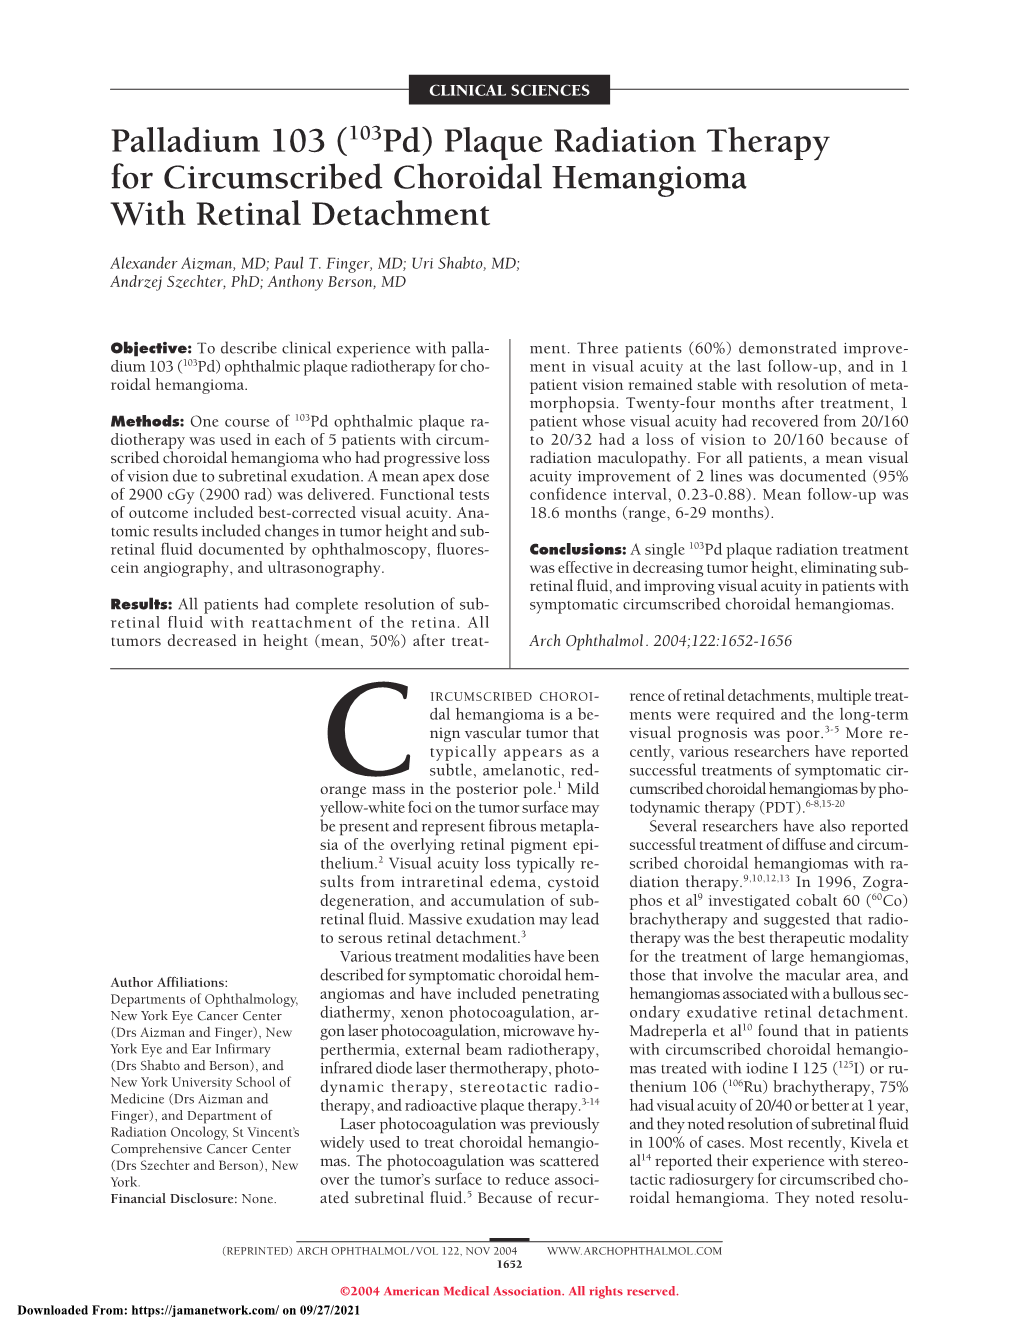 Plaque Radiation Therapy for Circumscribedchoroidal